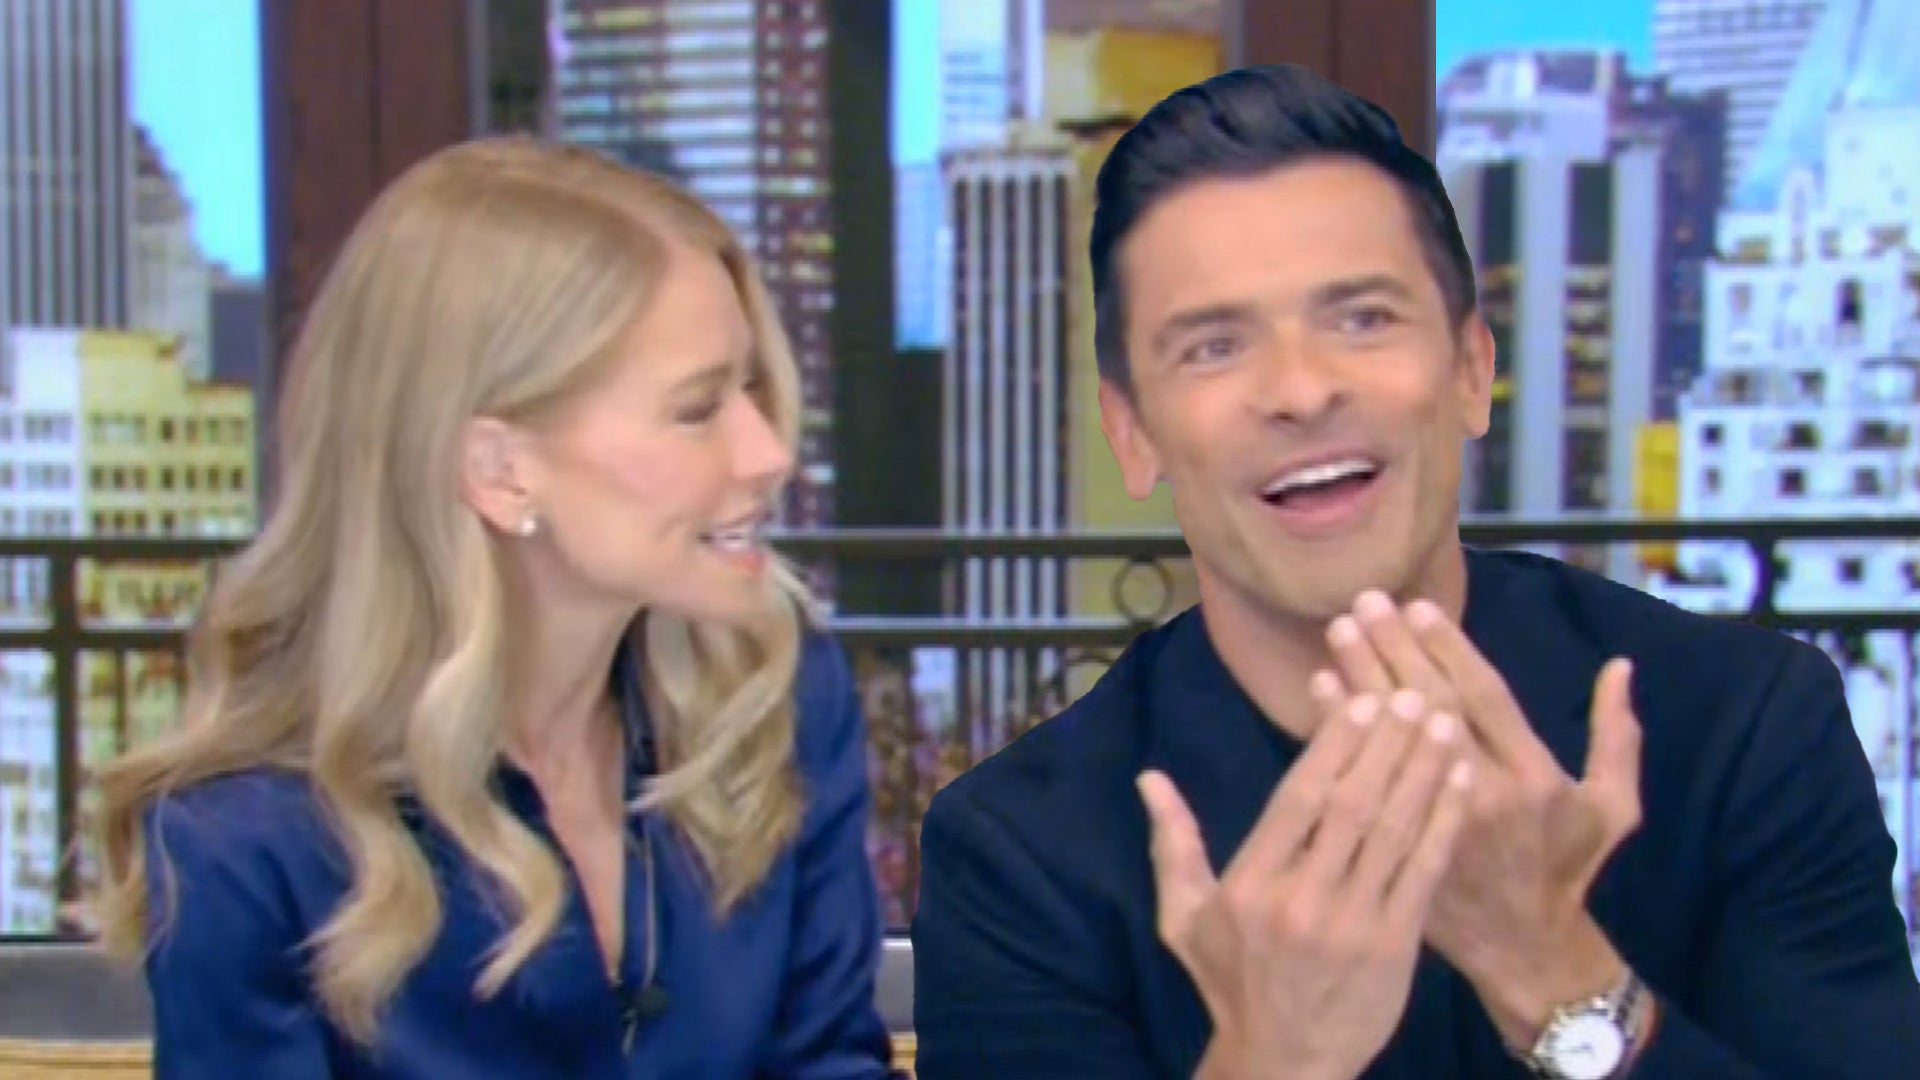 Mark Consuelos Confesses to Wife Kelly Ripa He Had a 'Passionate' Kiss With Another Woman in Public